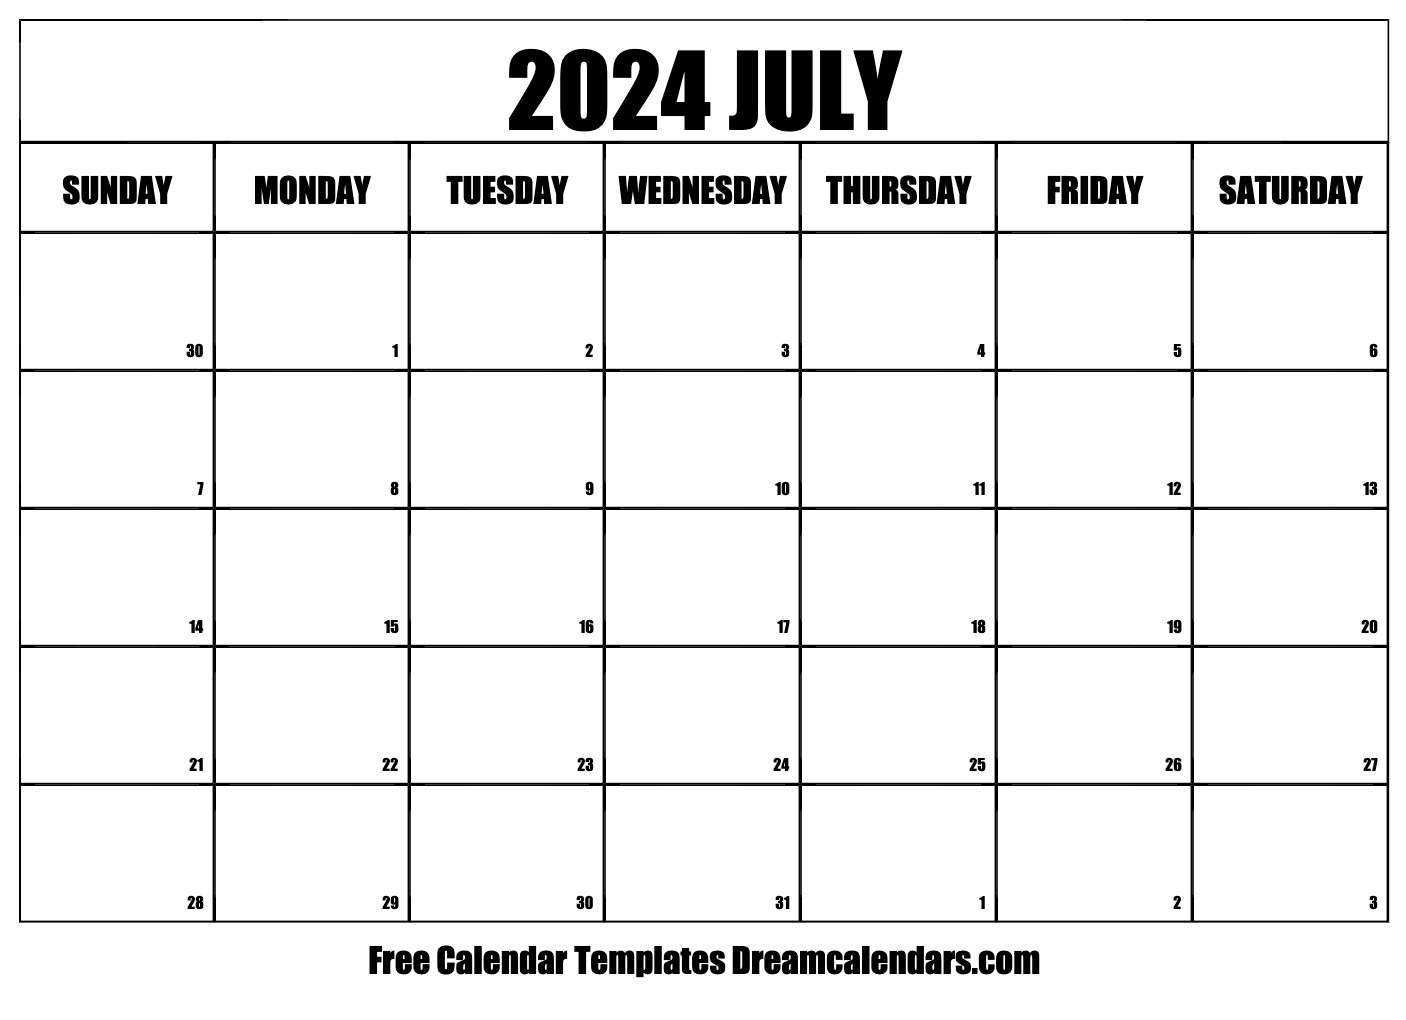 July 2024 Calendar | Free Blank Printable With Holidays for Free Printable Calendar 2024 July